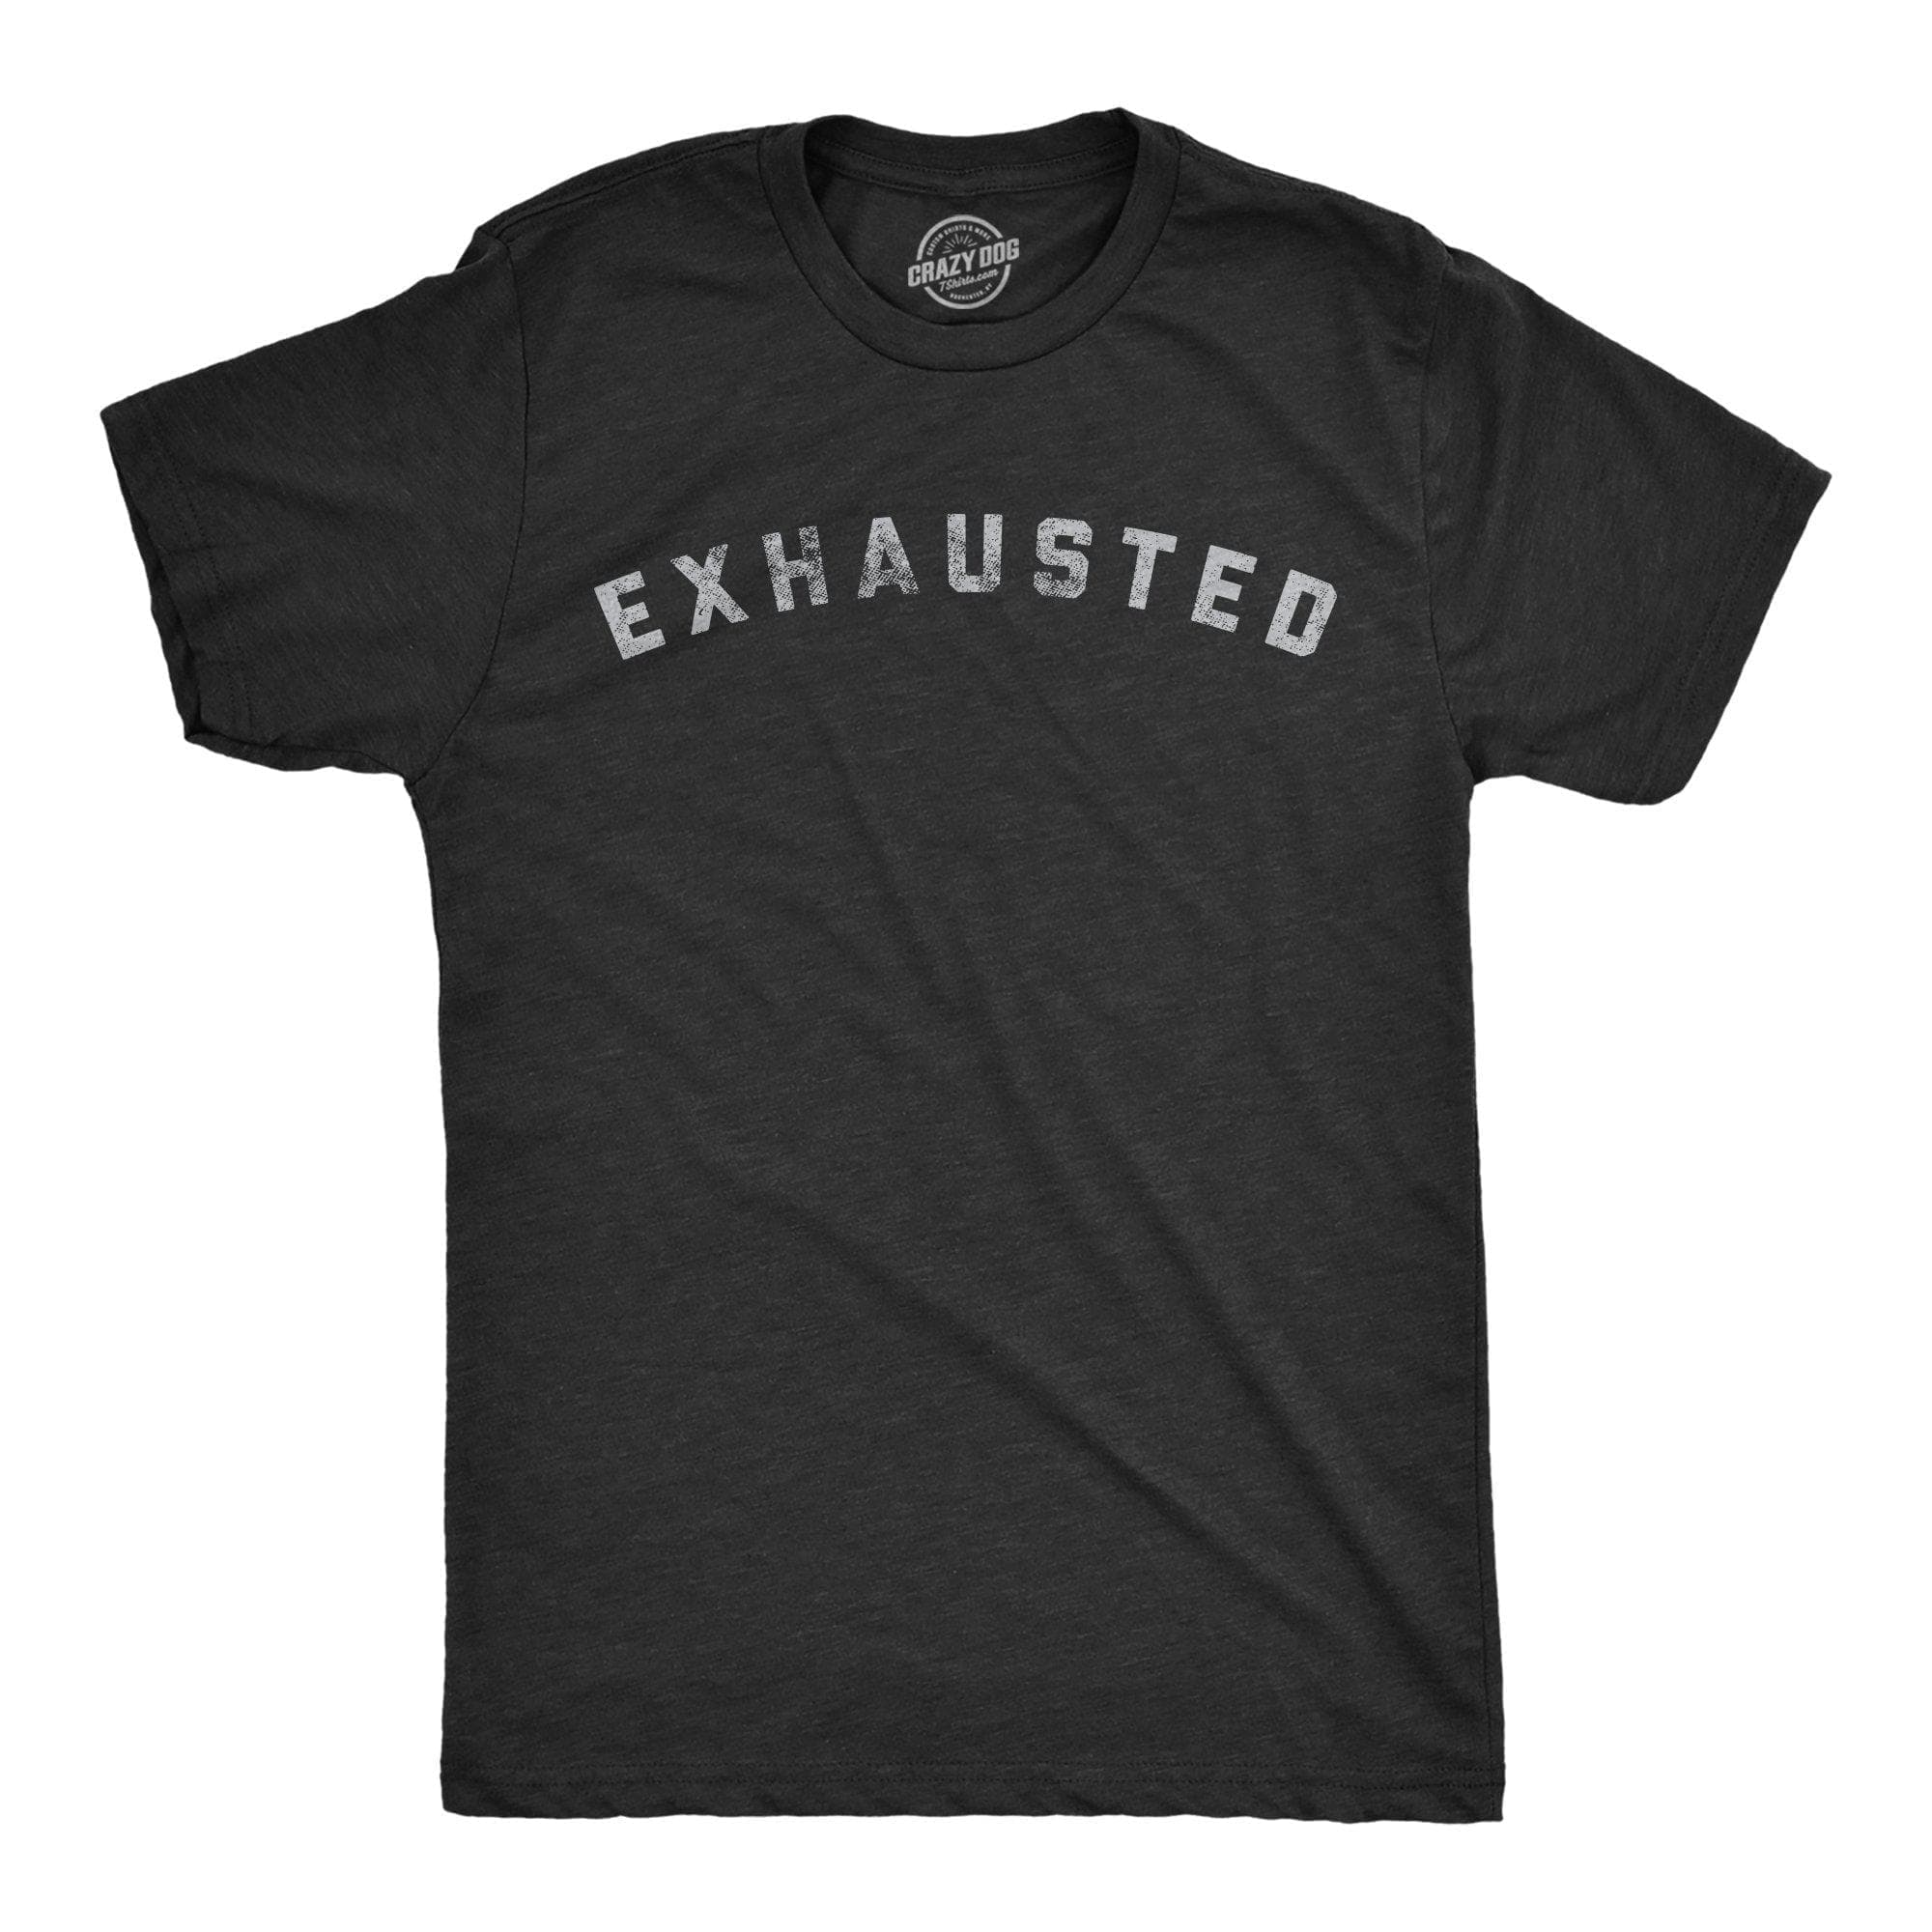 Exhausted Men's Tshirt - Crazy Dog T-Shirts